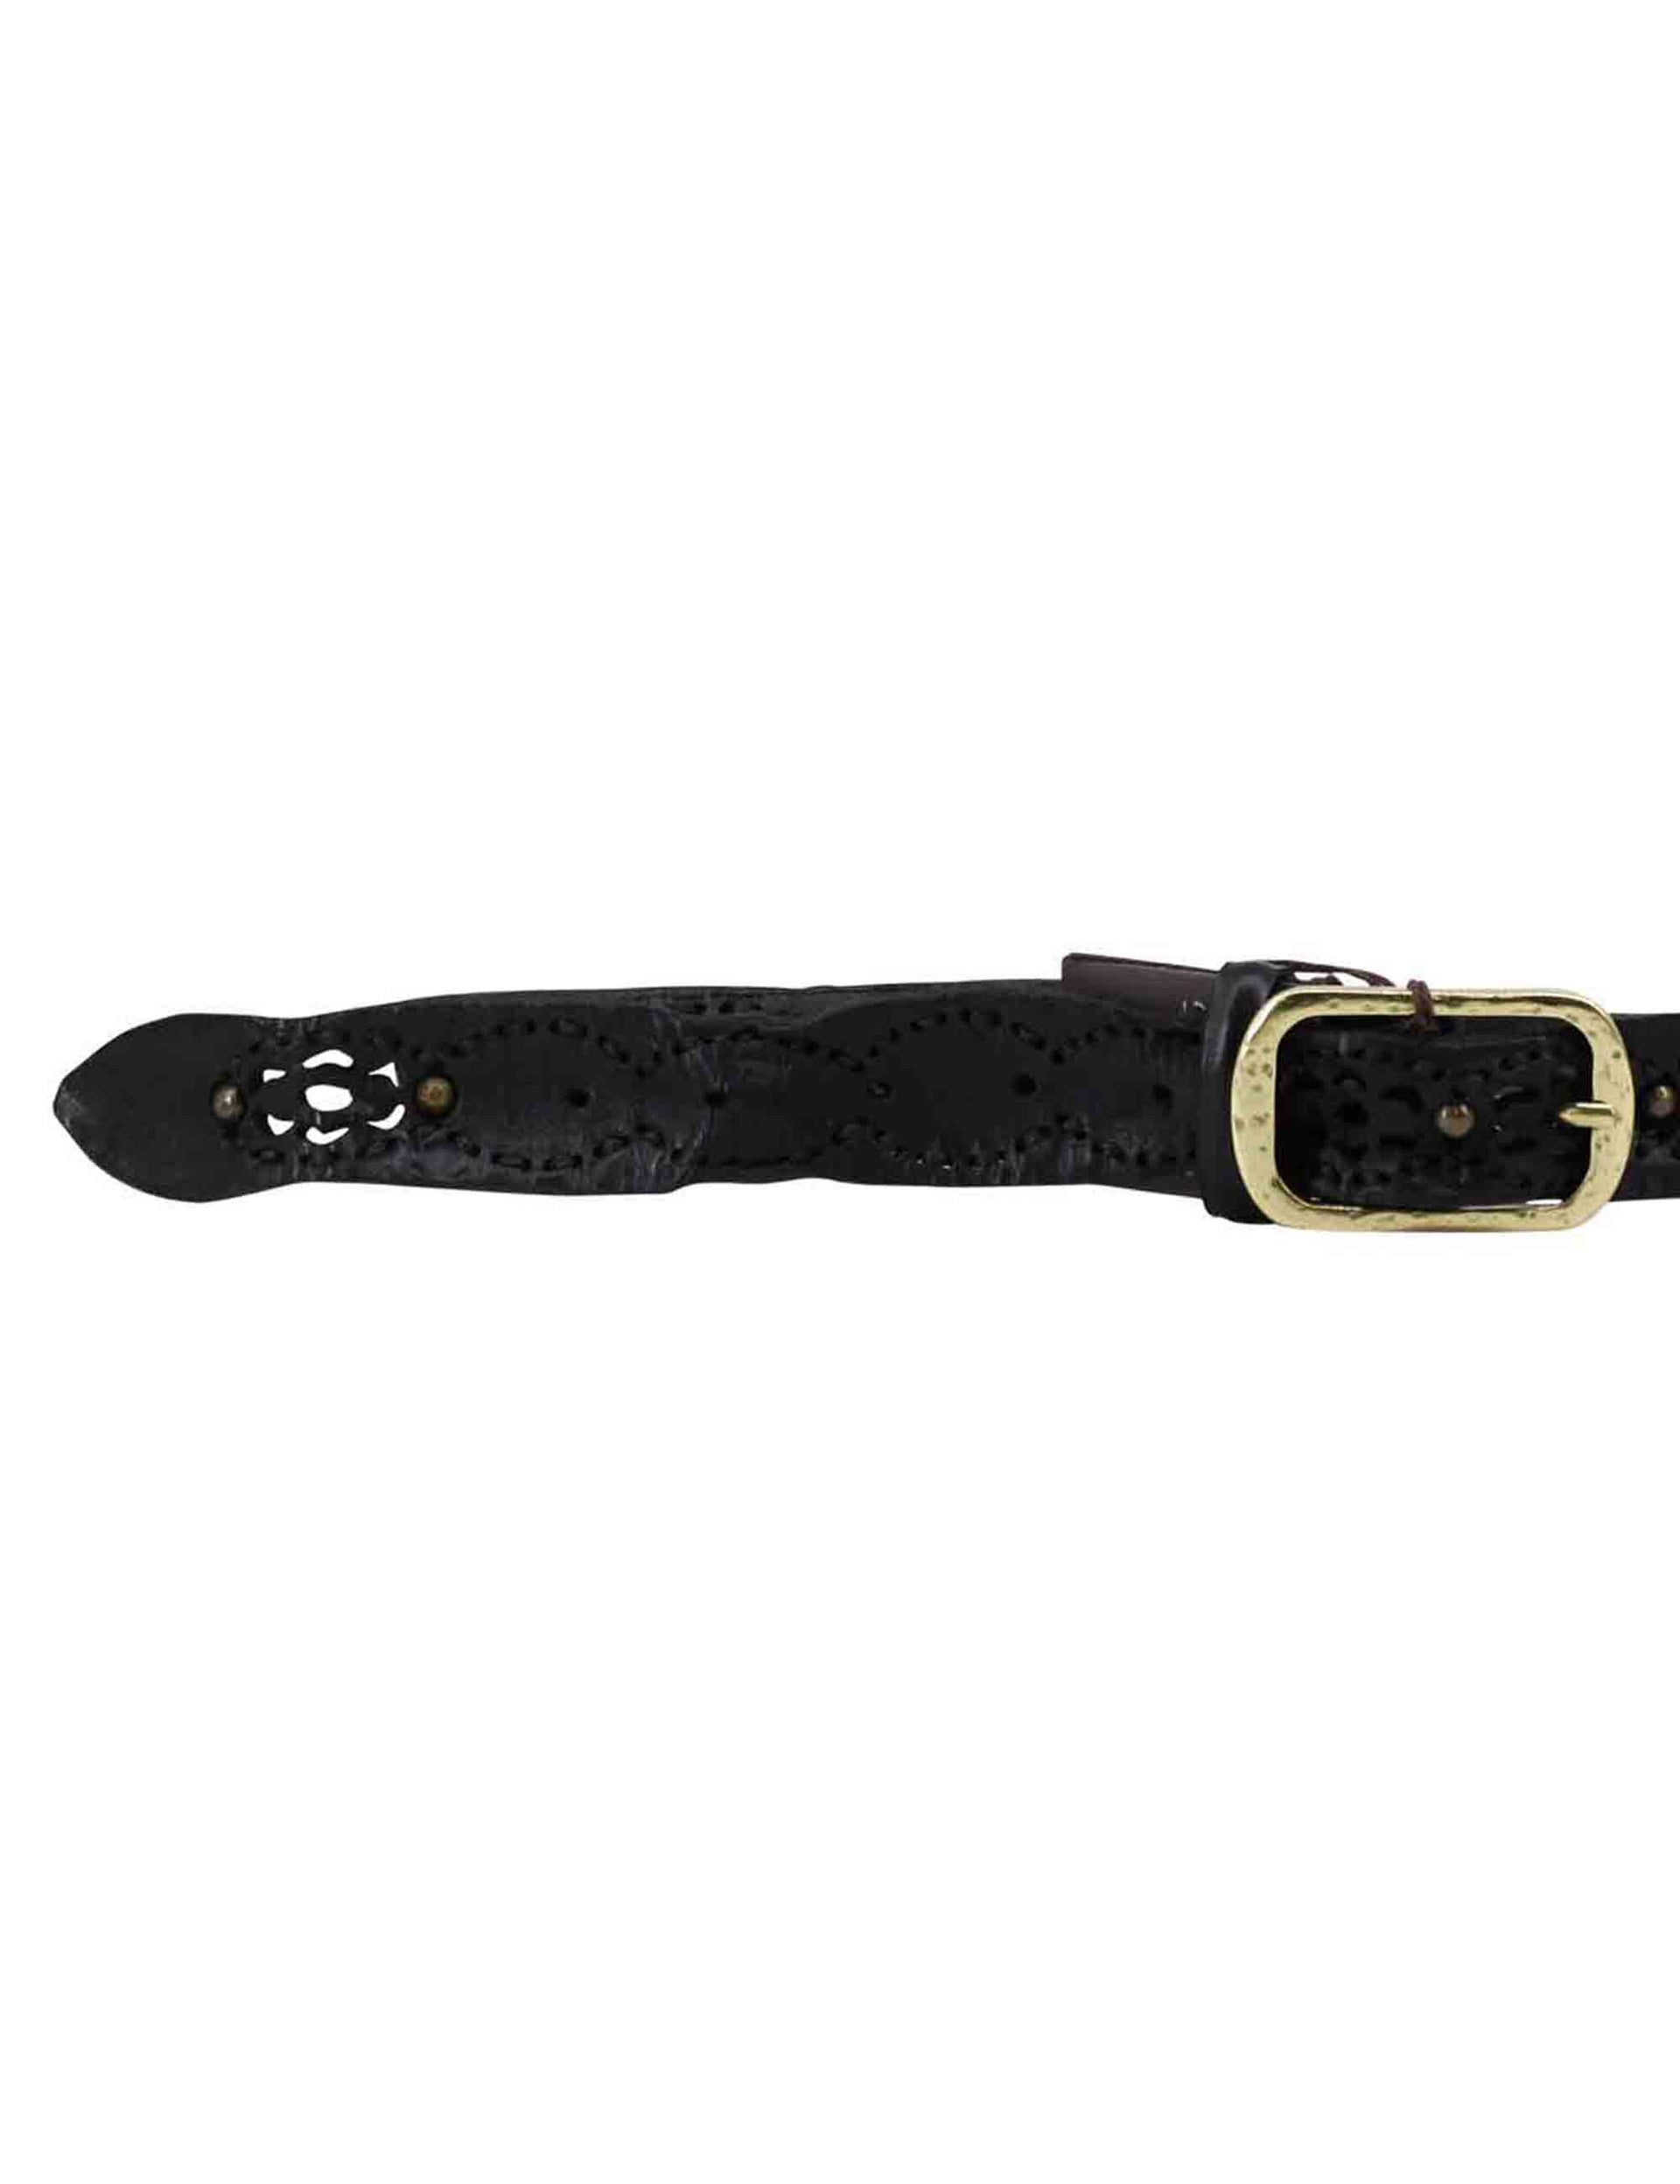 Women's black leather belts with studs